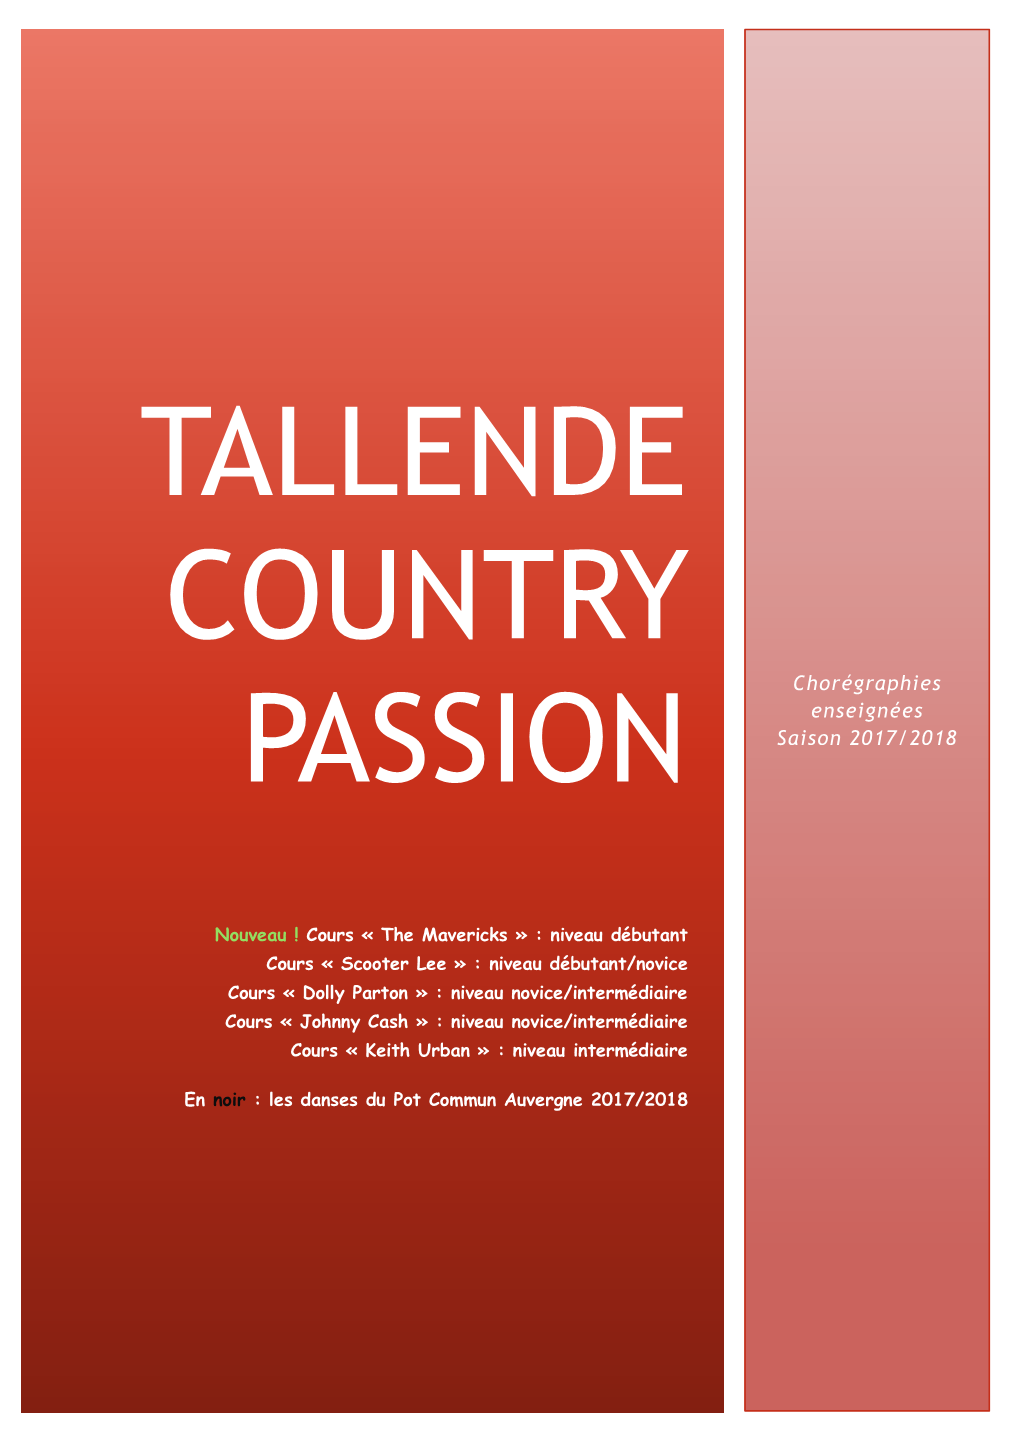 Tallende COUNTRY PASSION